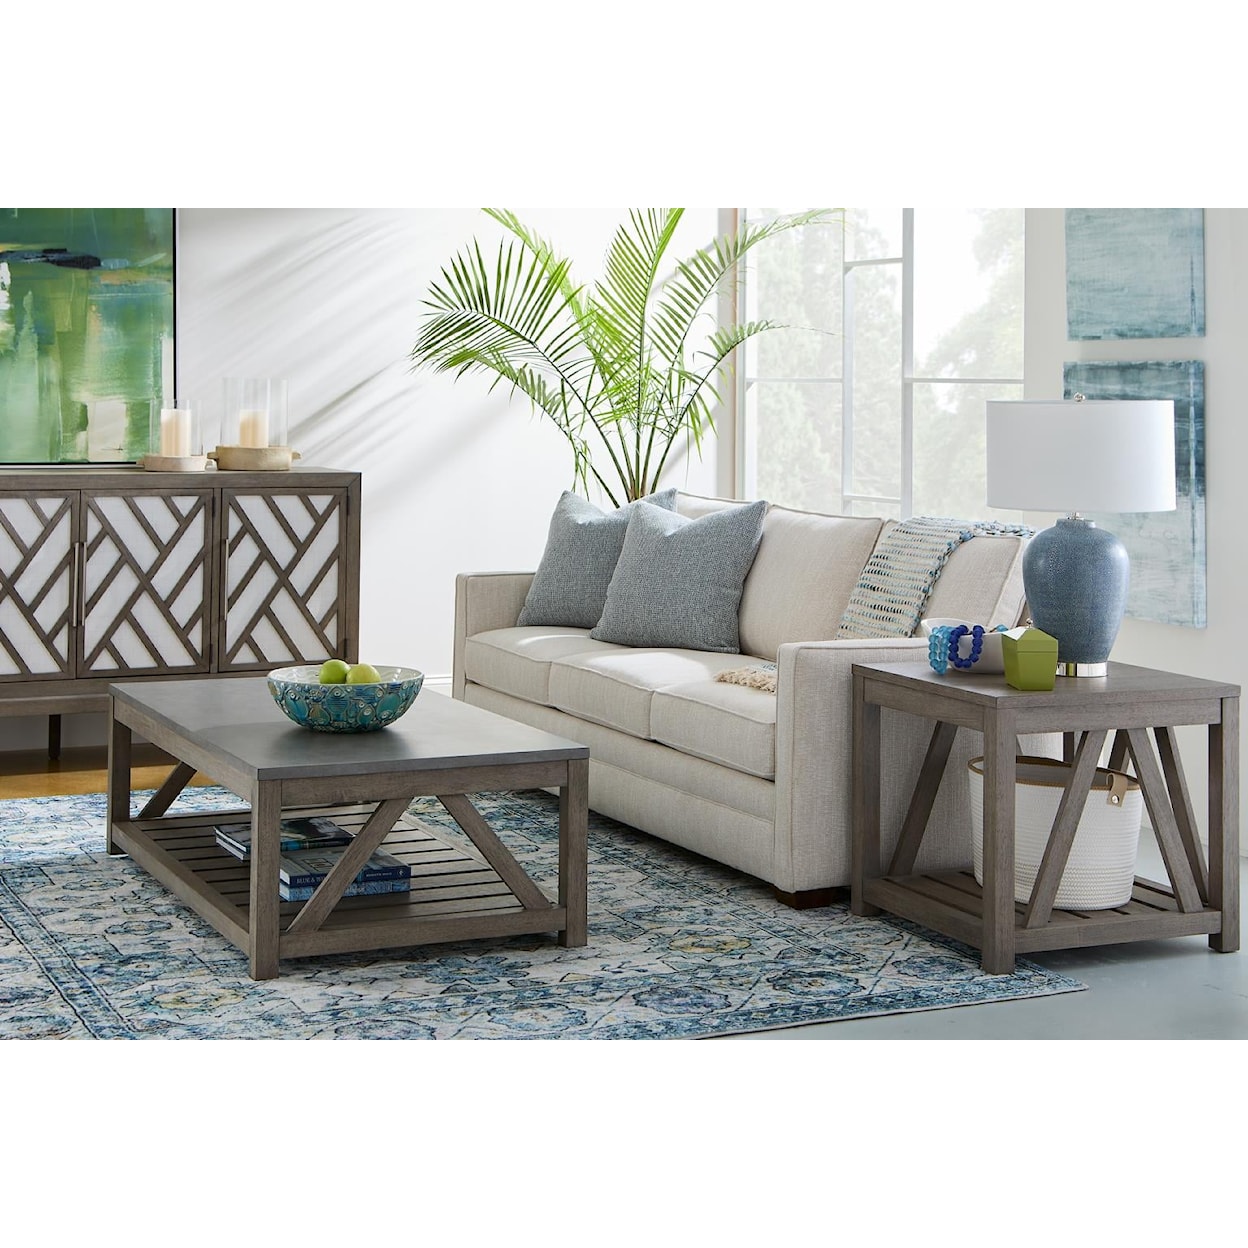 Trisha Yearwood Home Collection by Legacy Classic Staycation Console Table